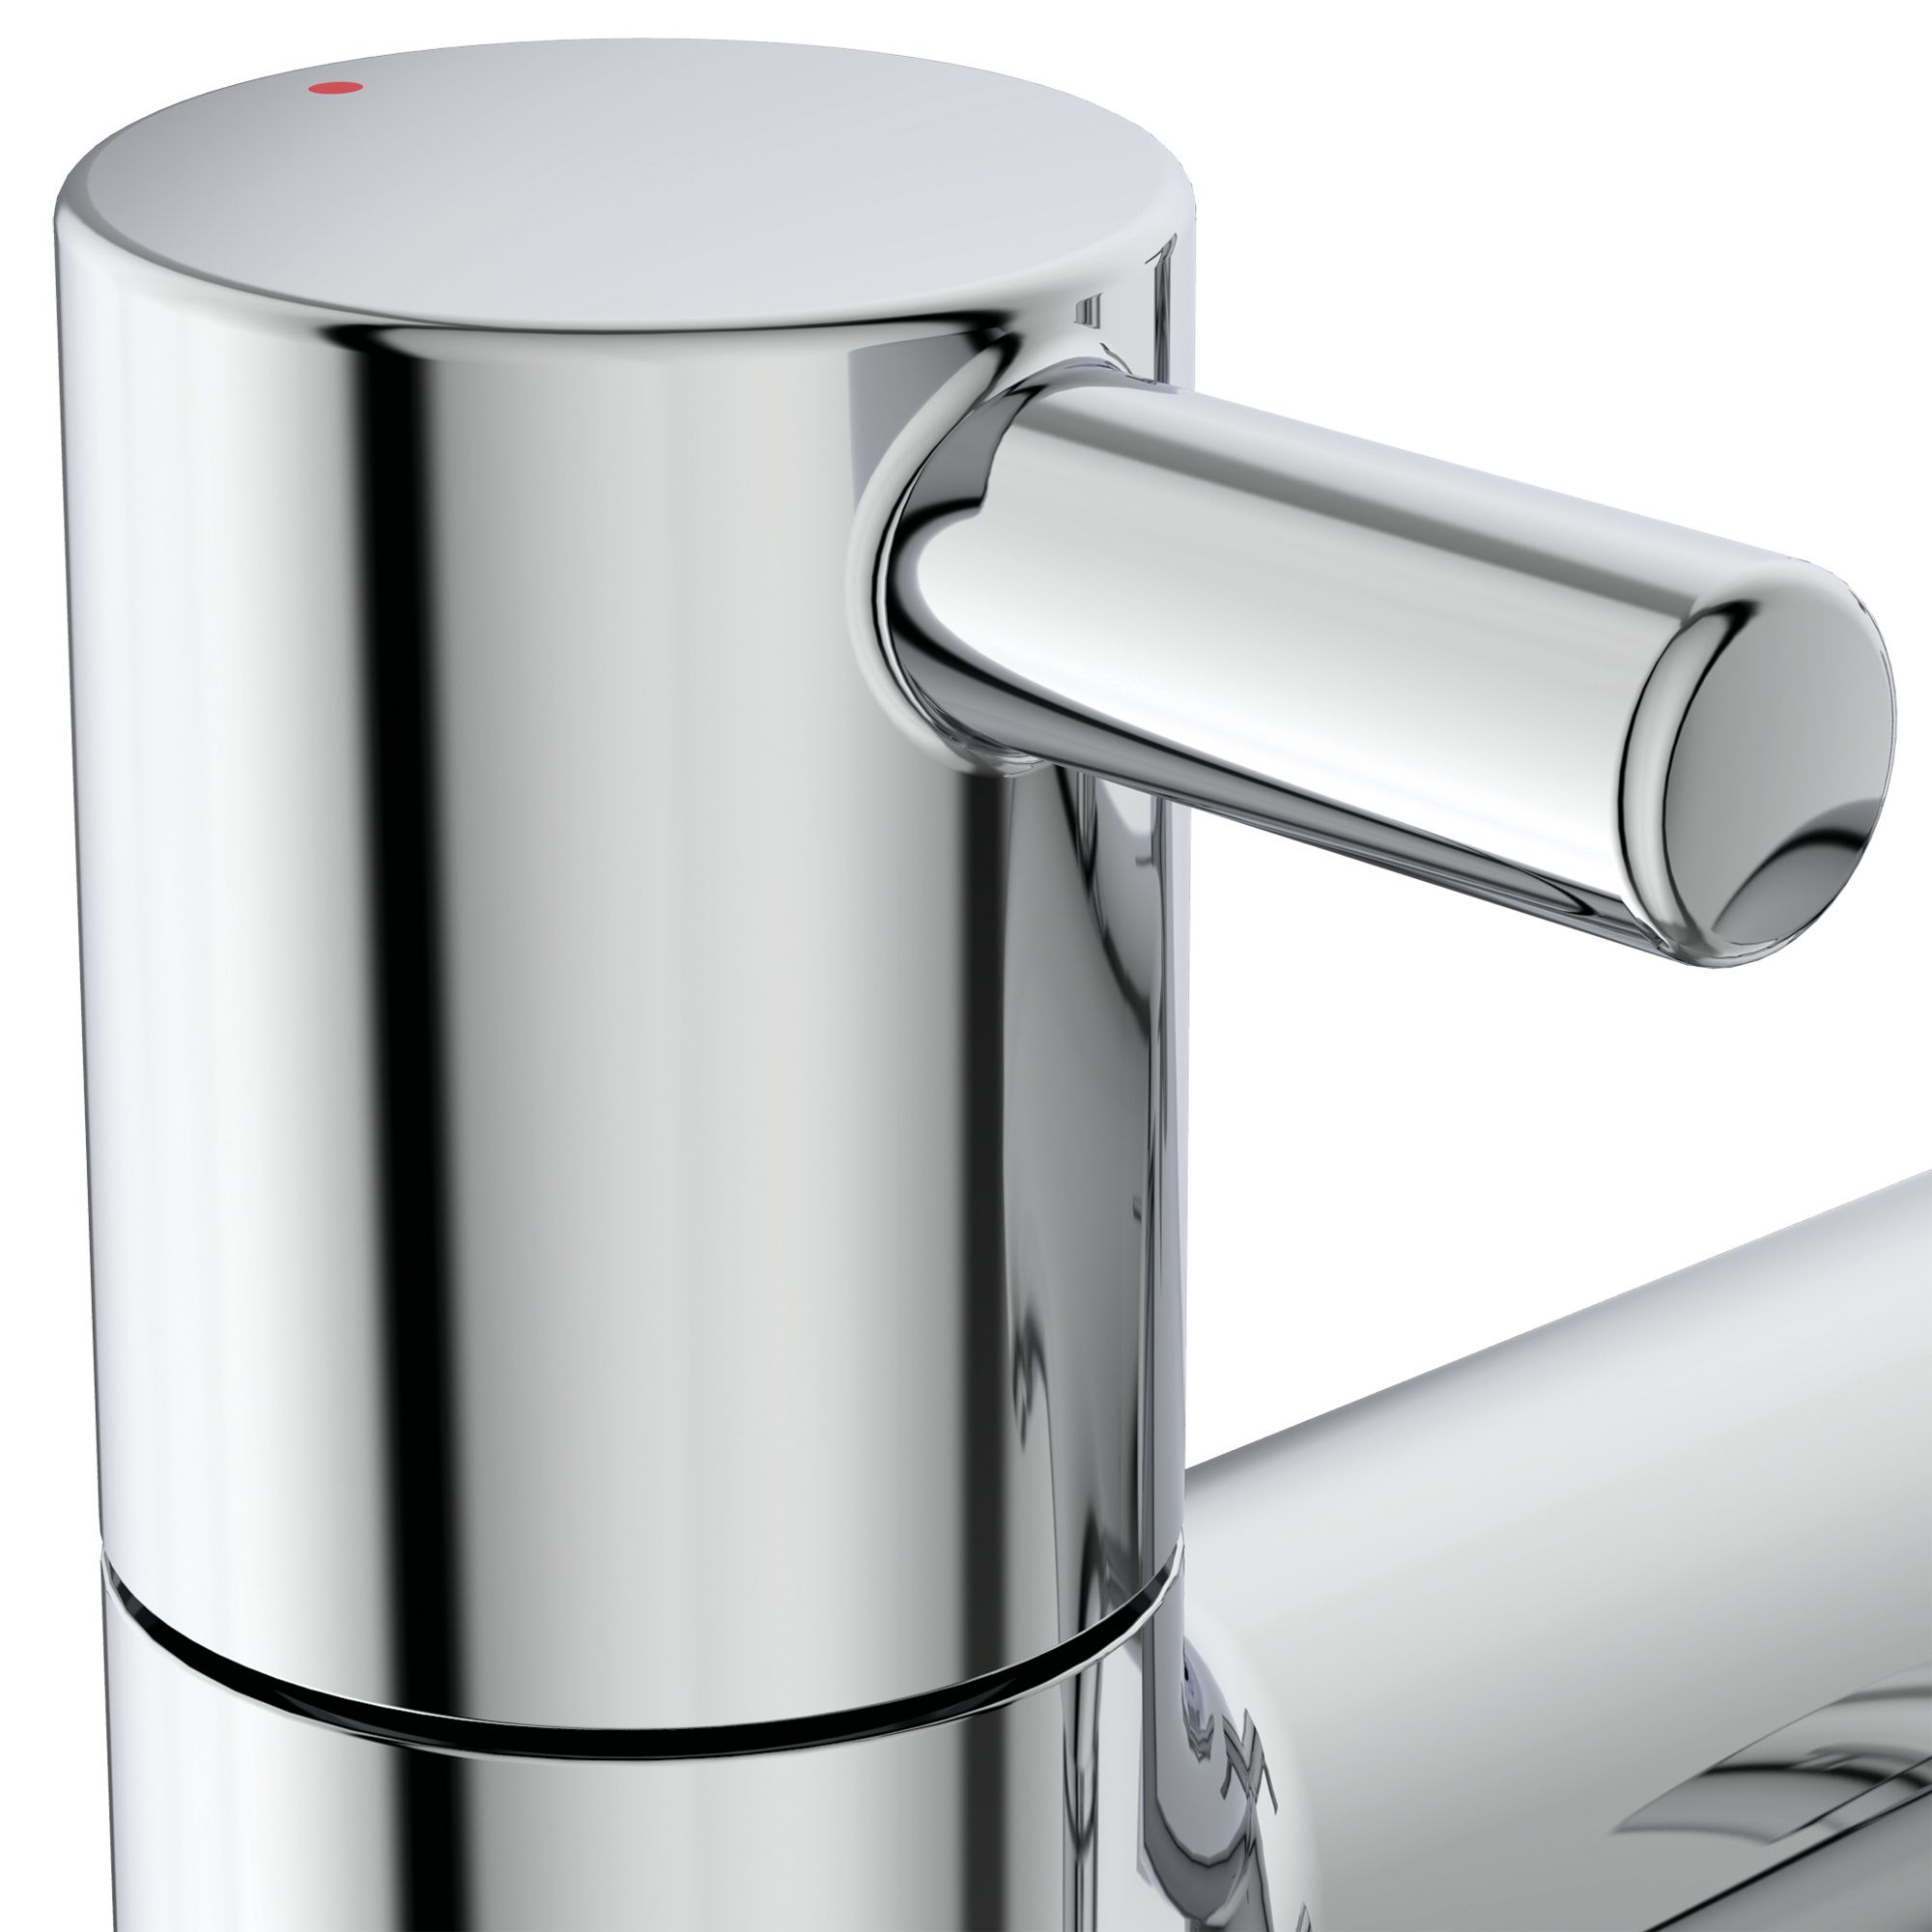 Ideal Standard Ceraline Chrome effect Ceramic disk Surface-mounted Double Shower mixer Tap